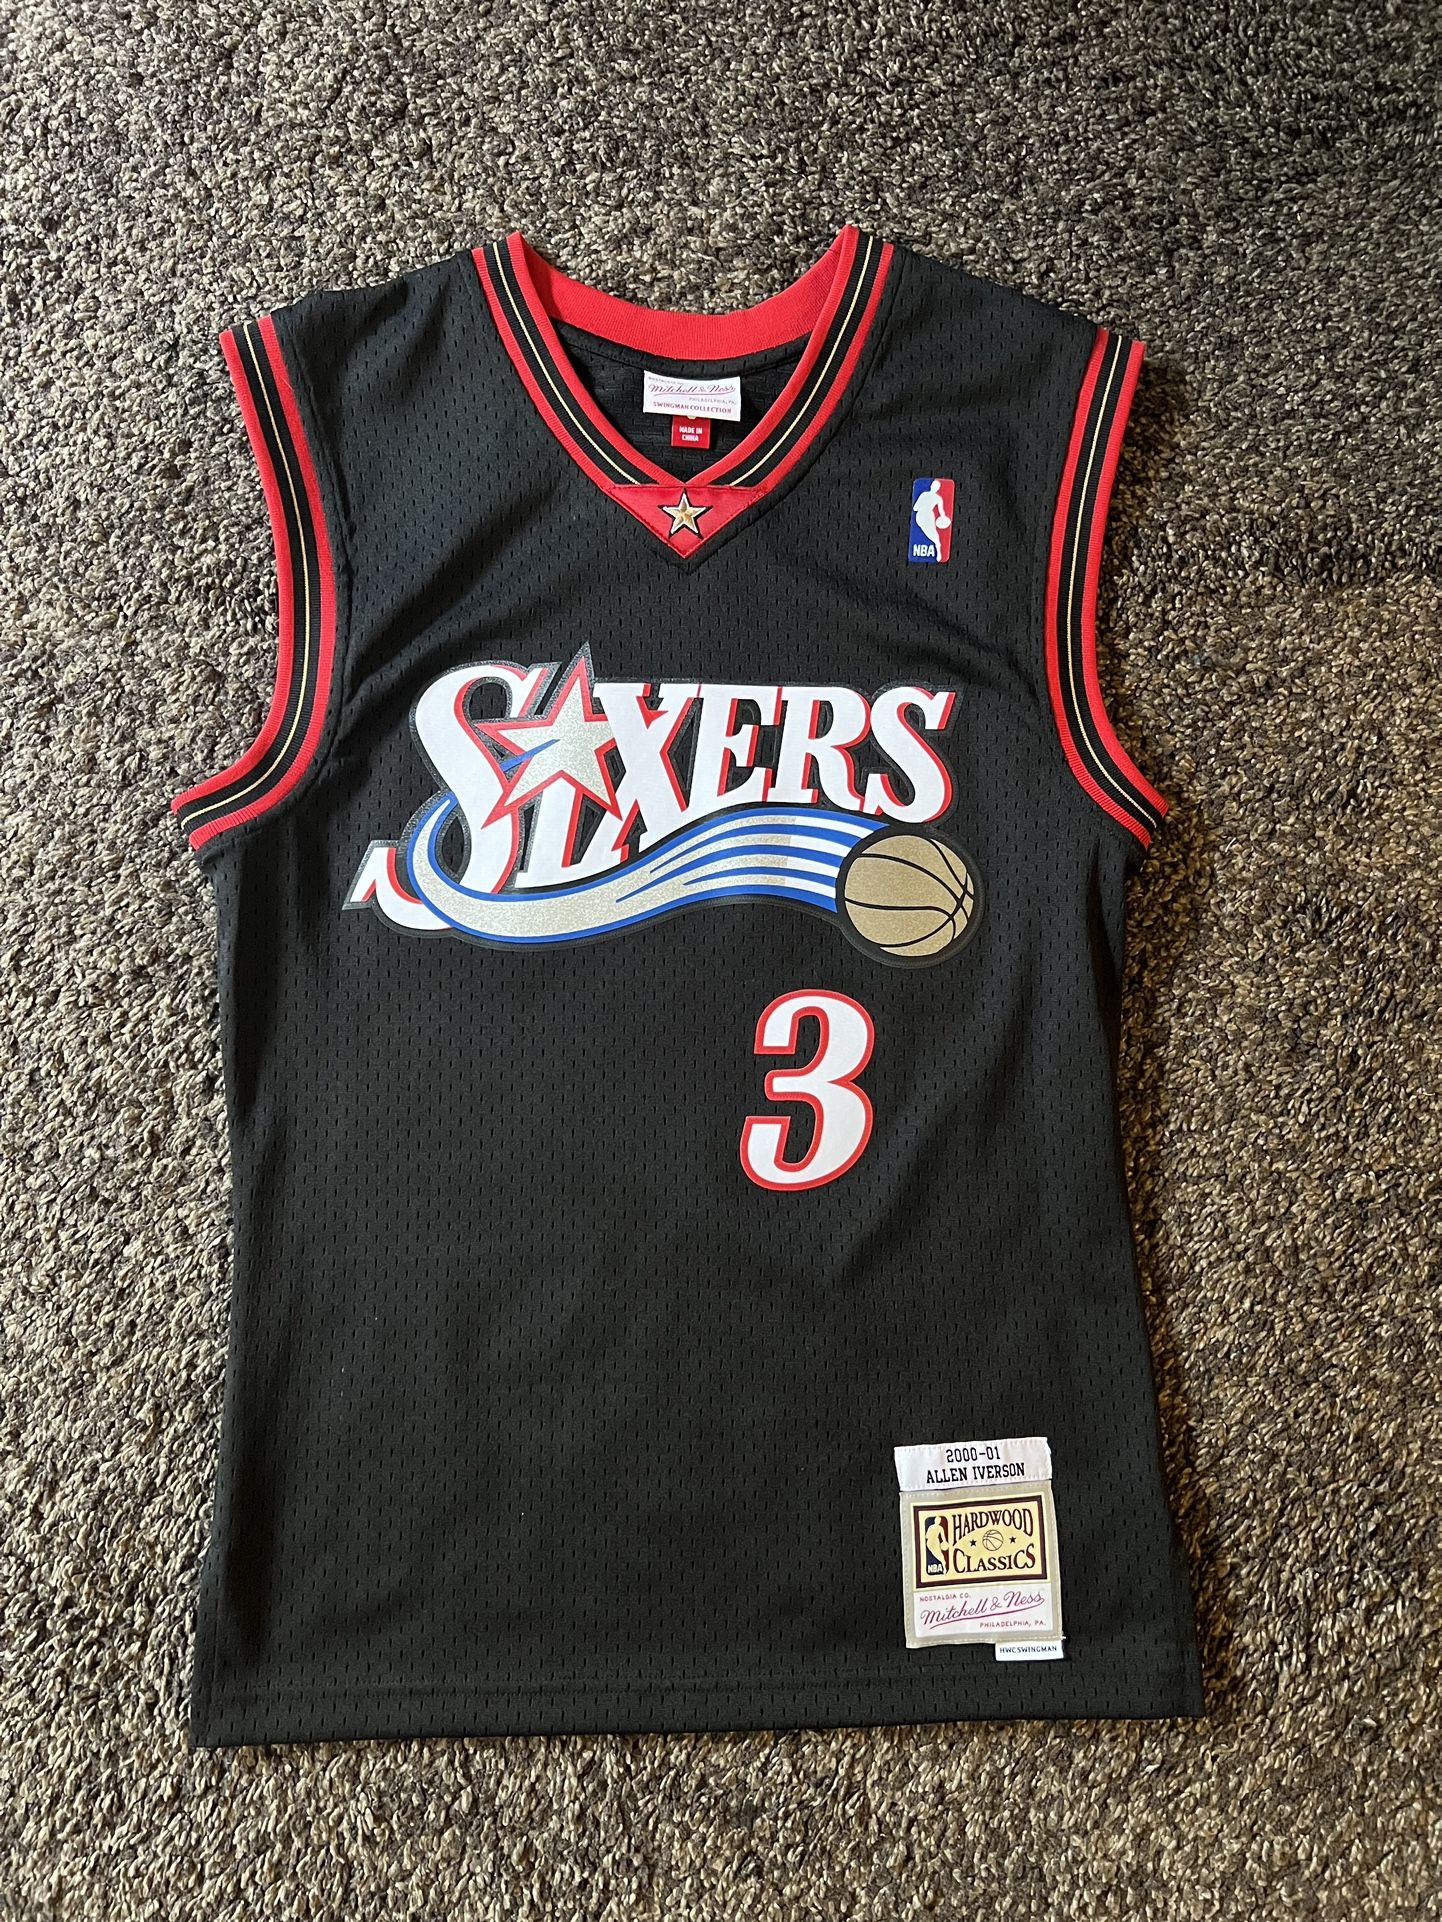 Allen Iverson Mitchell & Ness Vintage 76ers Sixers Jersey (Small Mens) Nike Adidas 